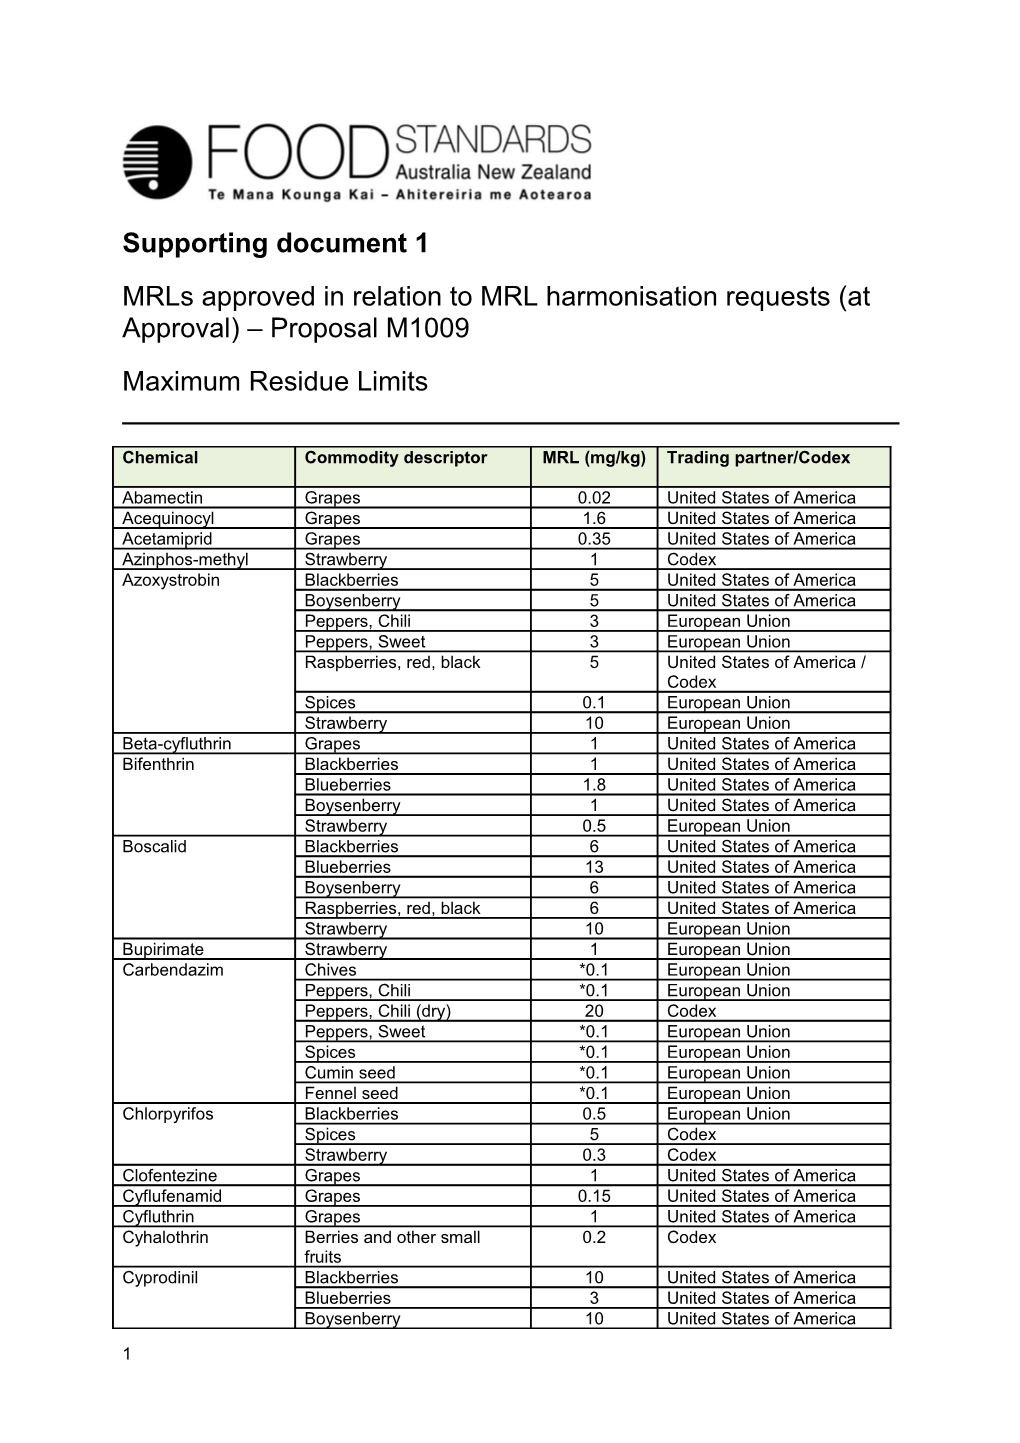 Mrls Approvedin Relation to MRL Harmonisation Requests(At Approval) Proposal M1009